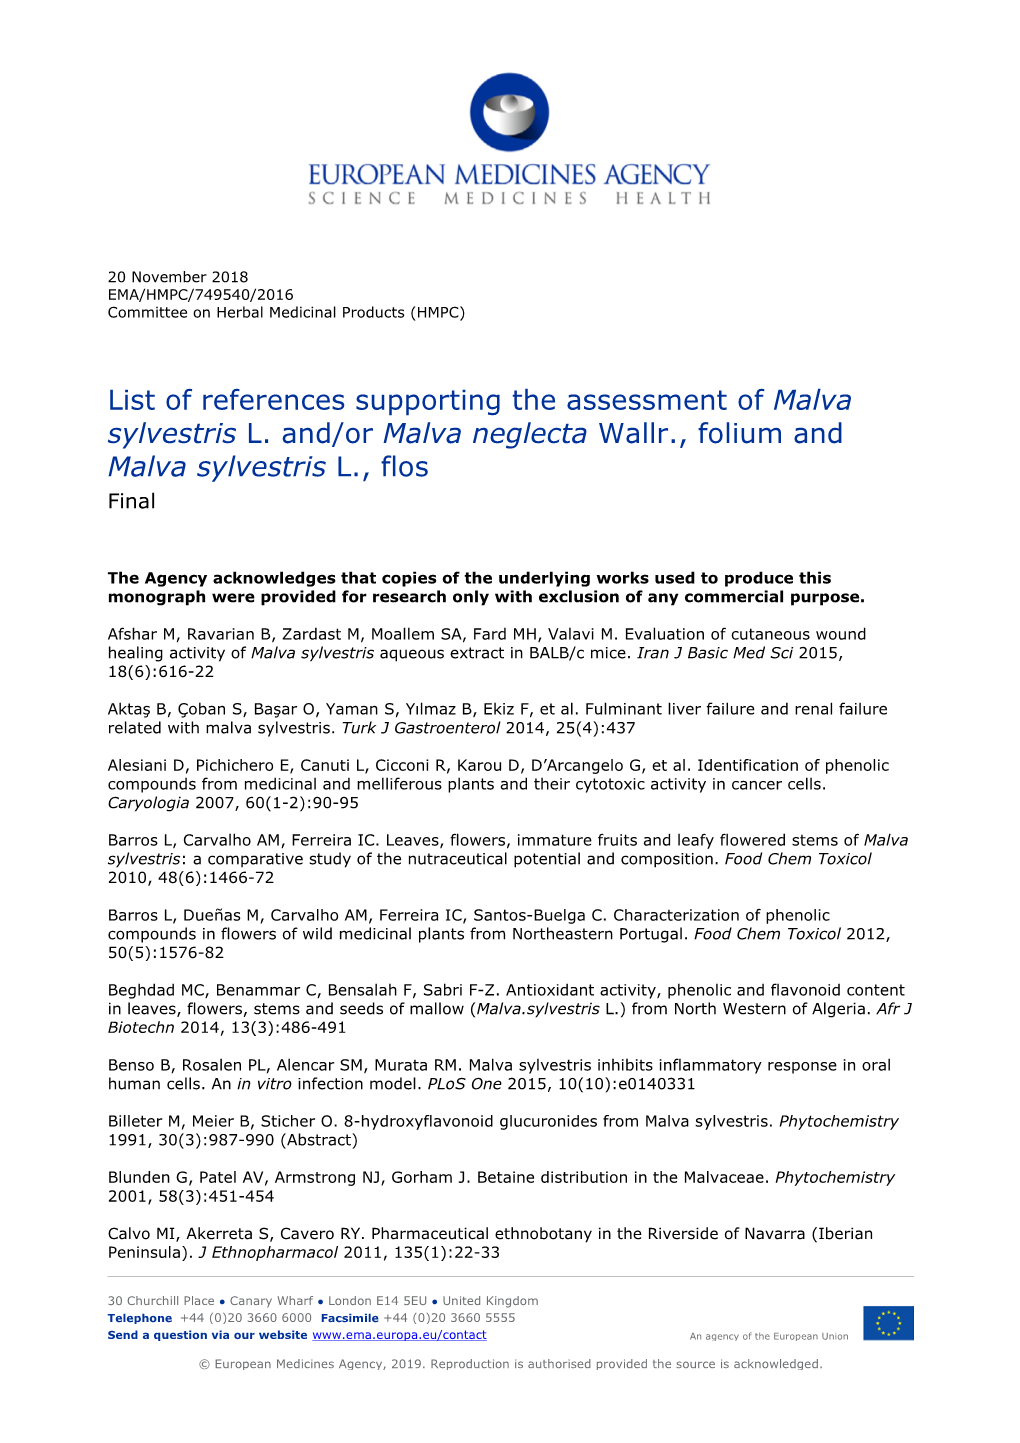 List of References Supporting the Assessment of Malva Sylvestris L